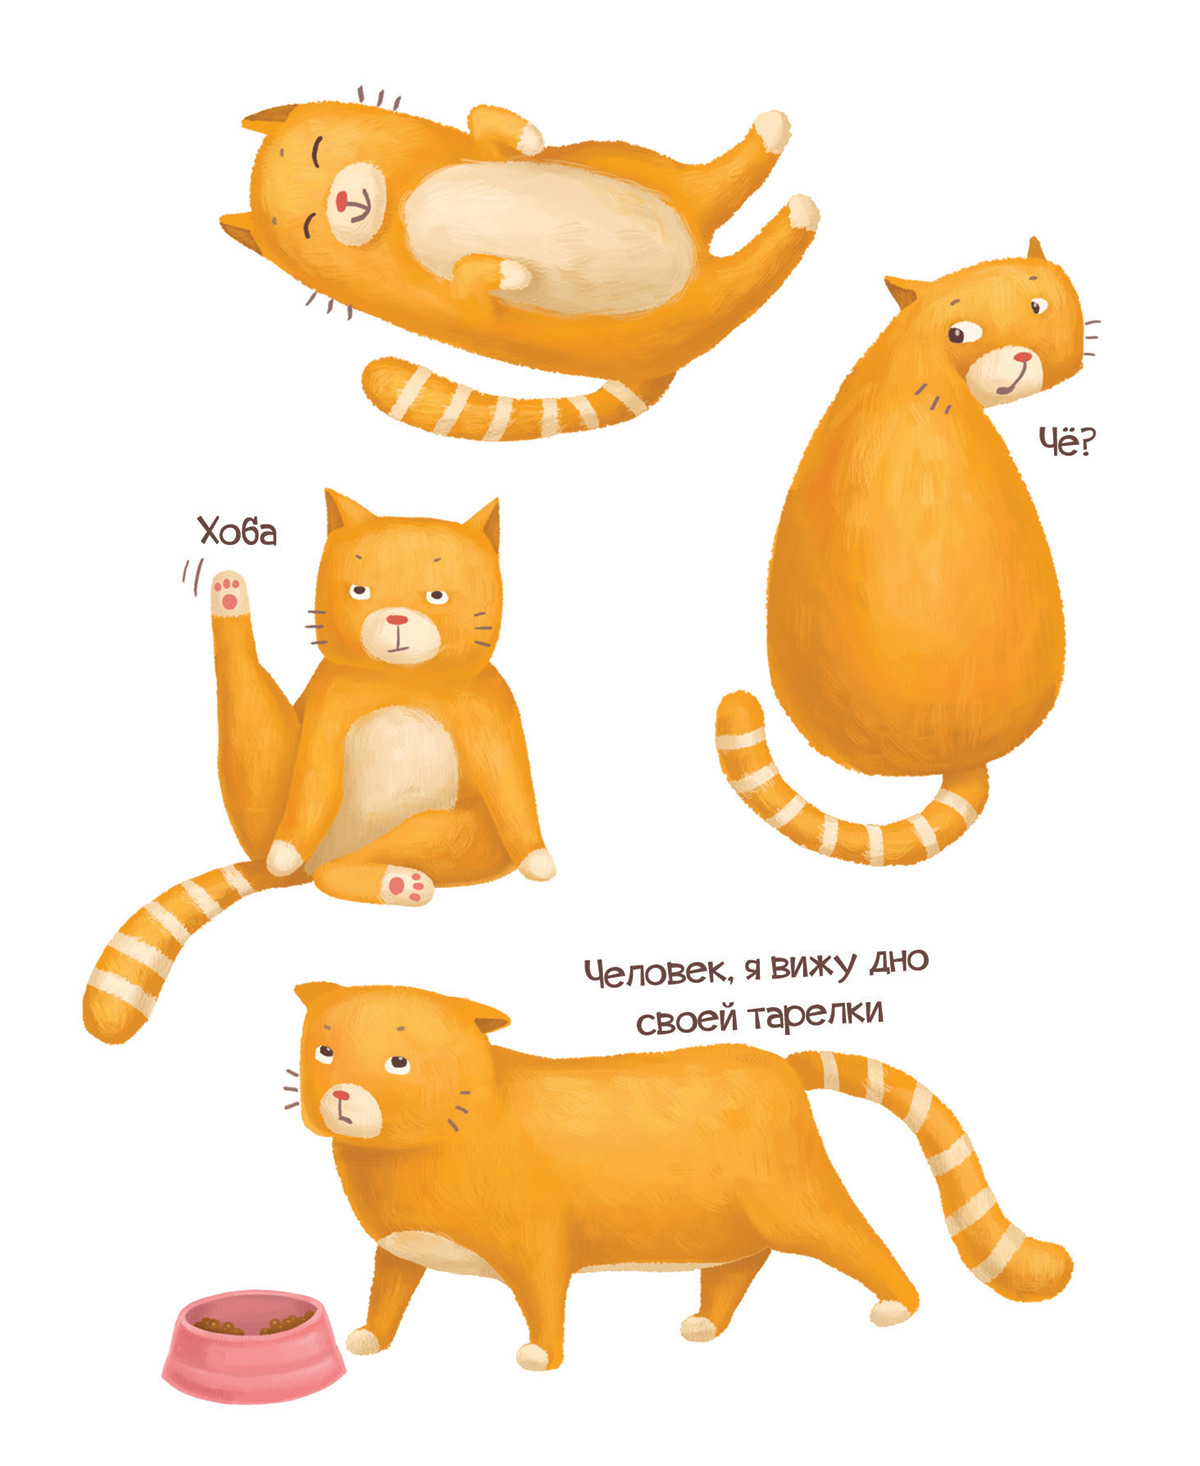 Cat stickers catstickers gingercat ILLUSTRATION  redcat characterdesign Character animalillustration childrenbook